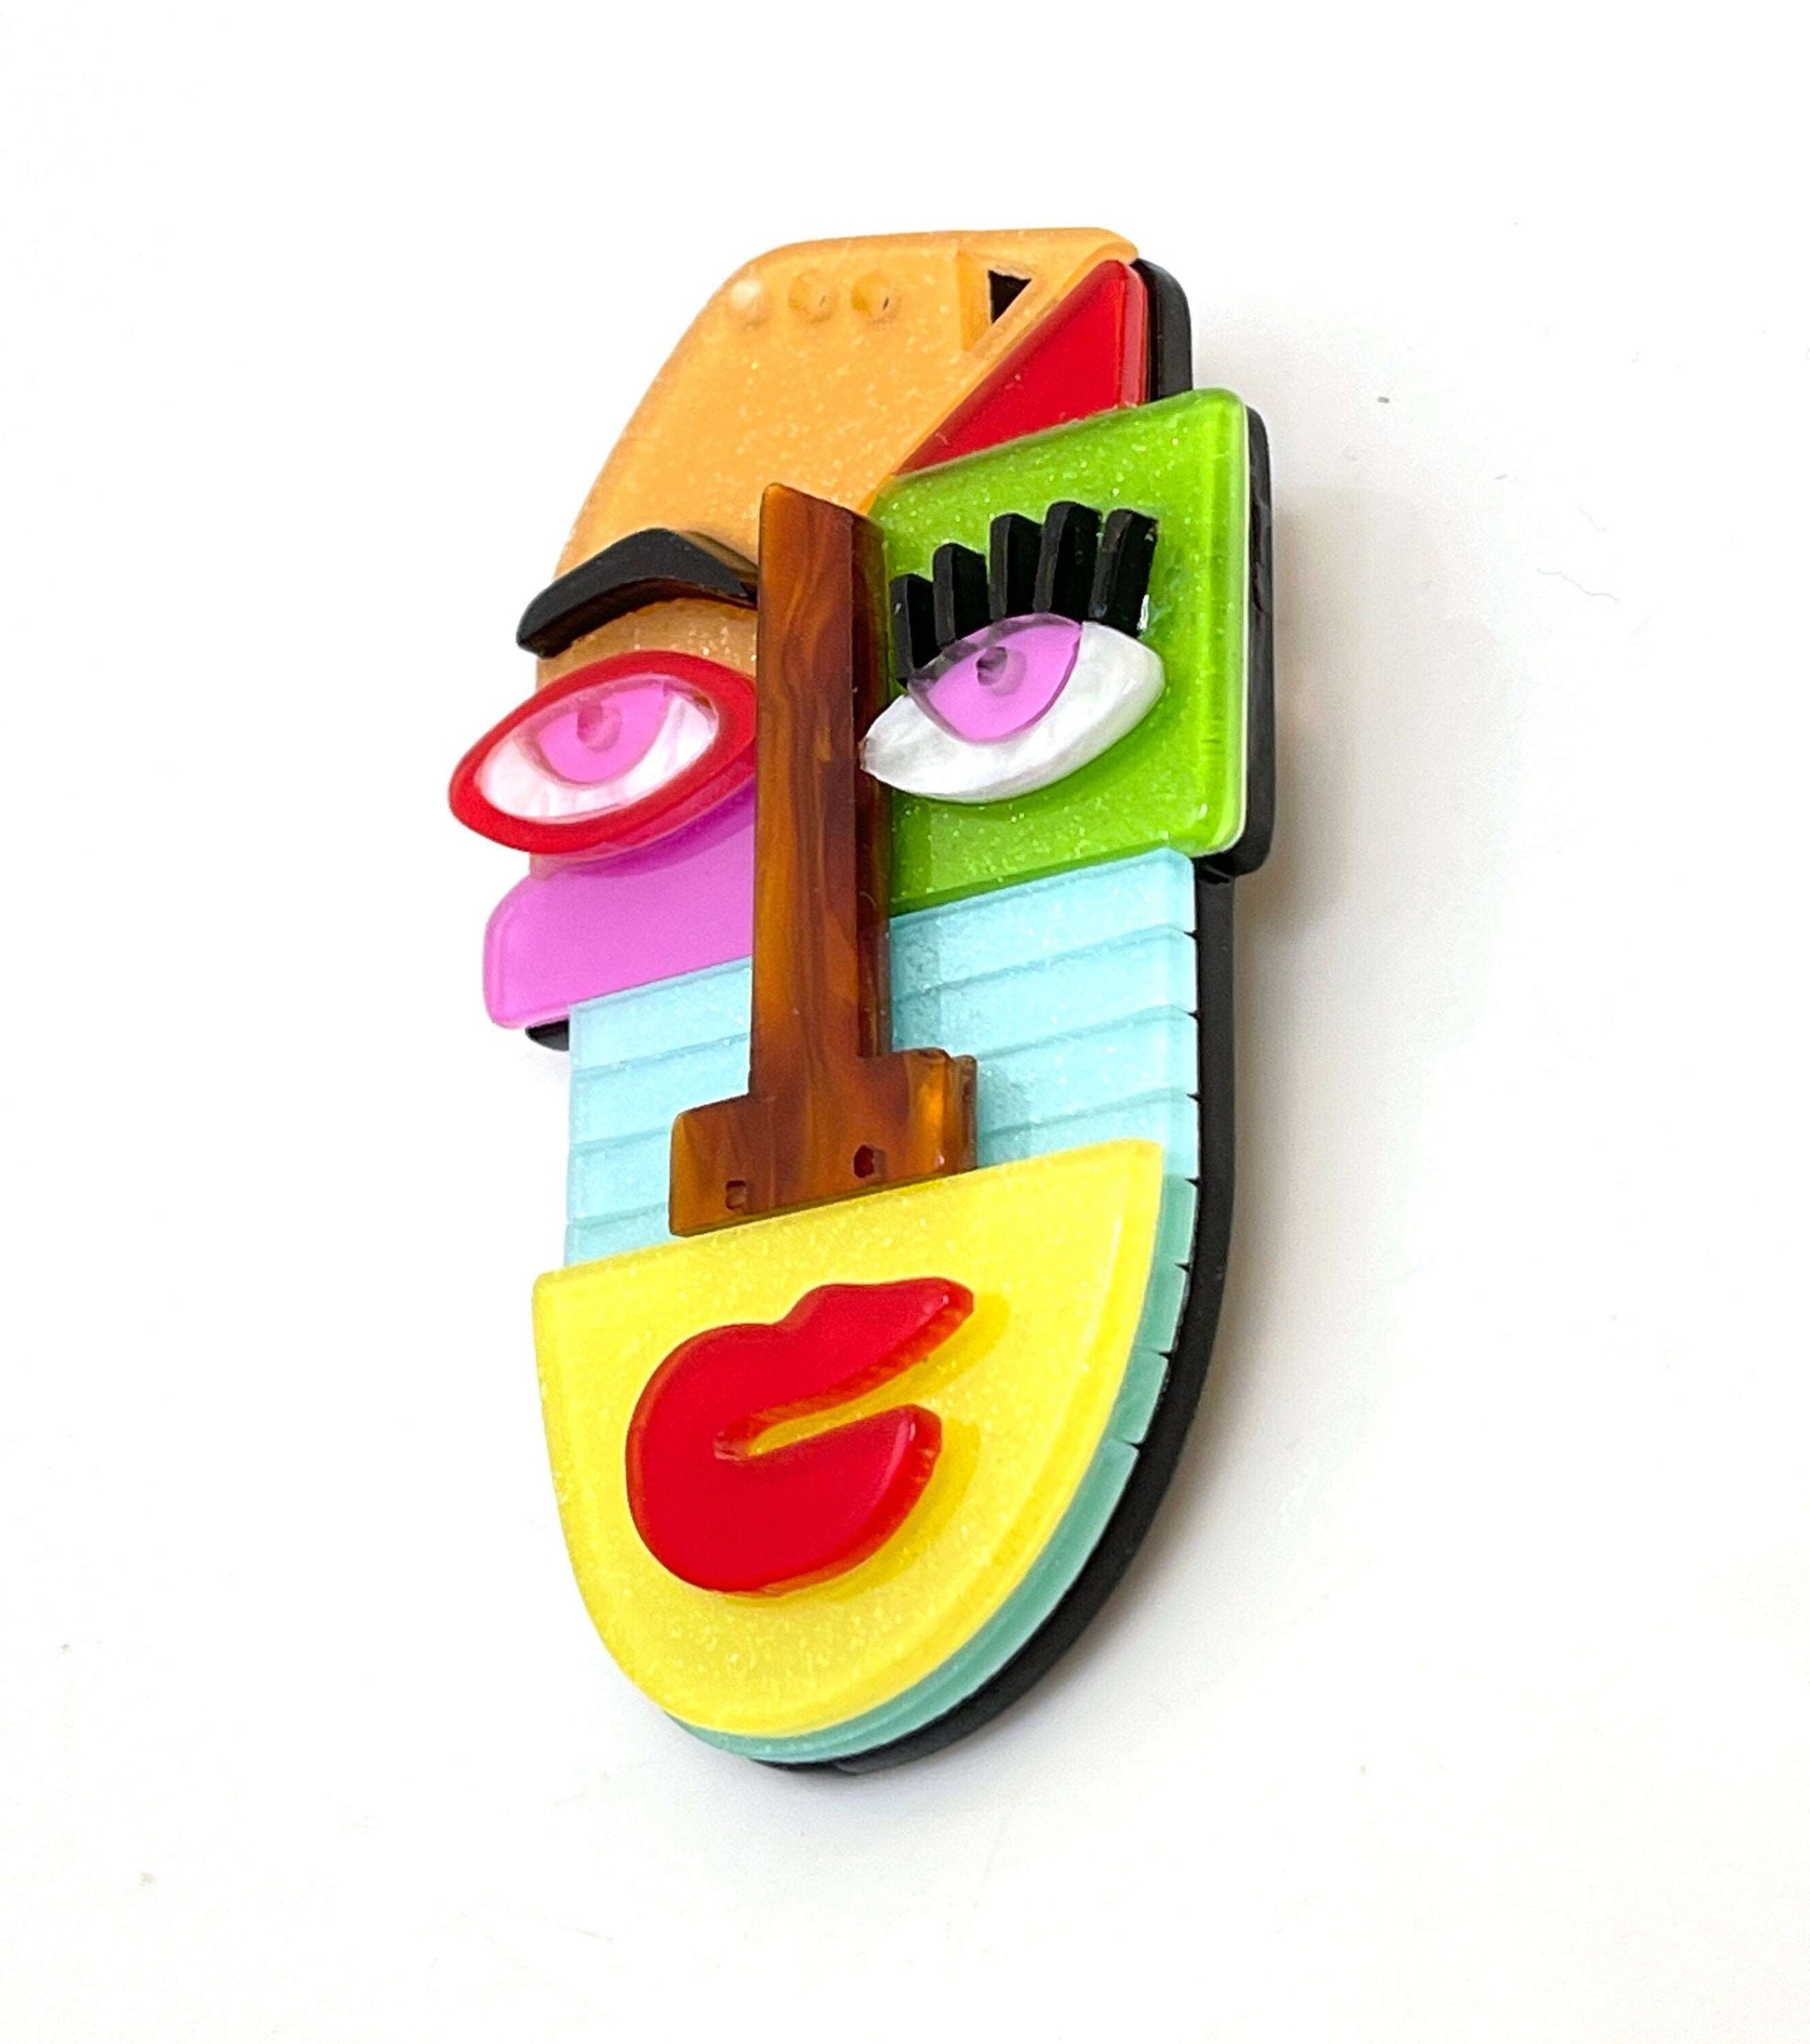 Fun Colourful Face Brooch, Abstract Head Pin, Fashion Pin for Jacket Scarf, Picasso Style Pin, Brooches For Women